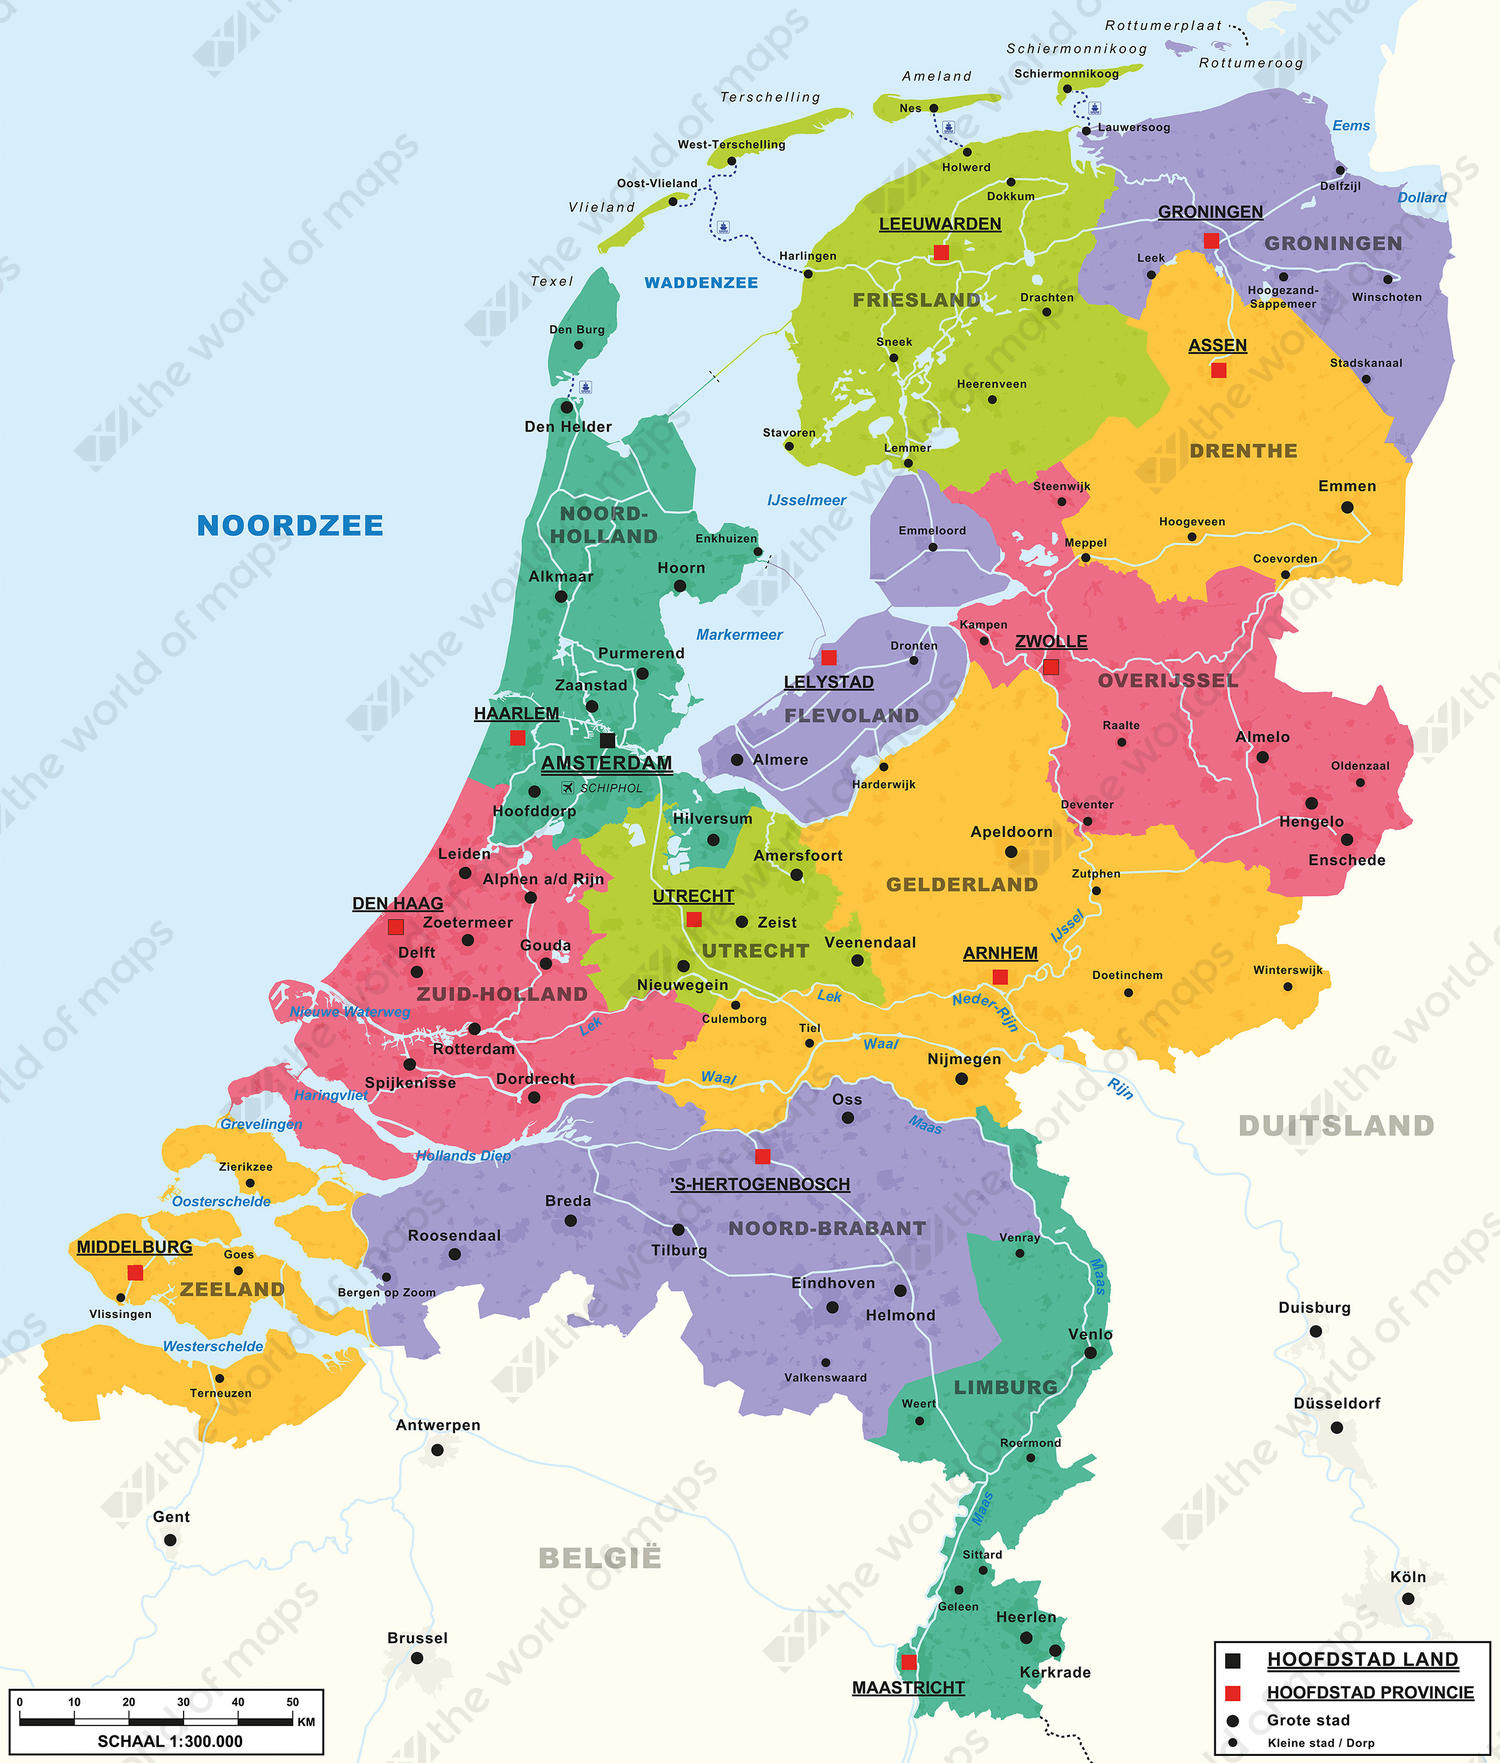 Digital Basic Map of The Netherlands 462 | The World of Maps.com